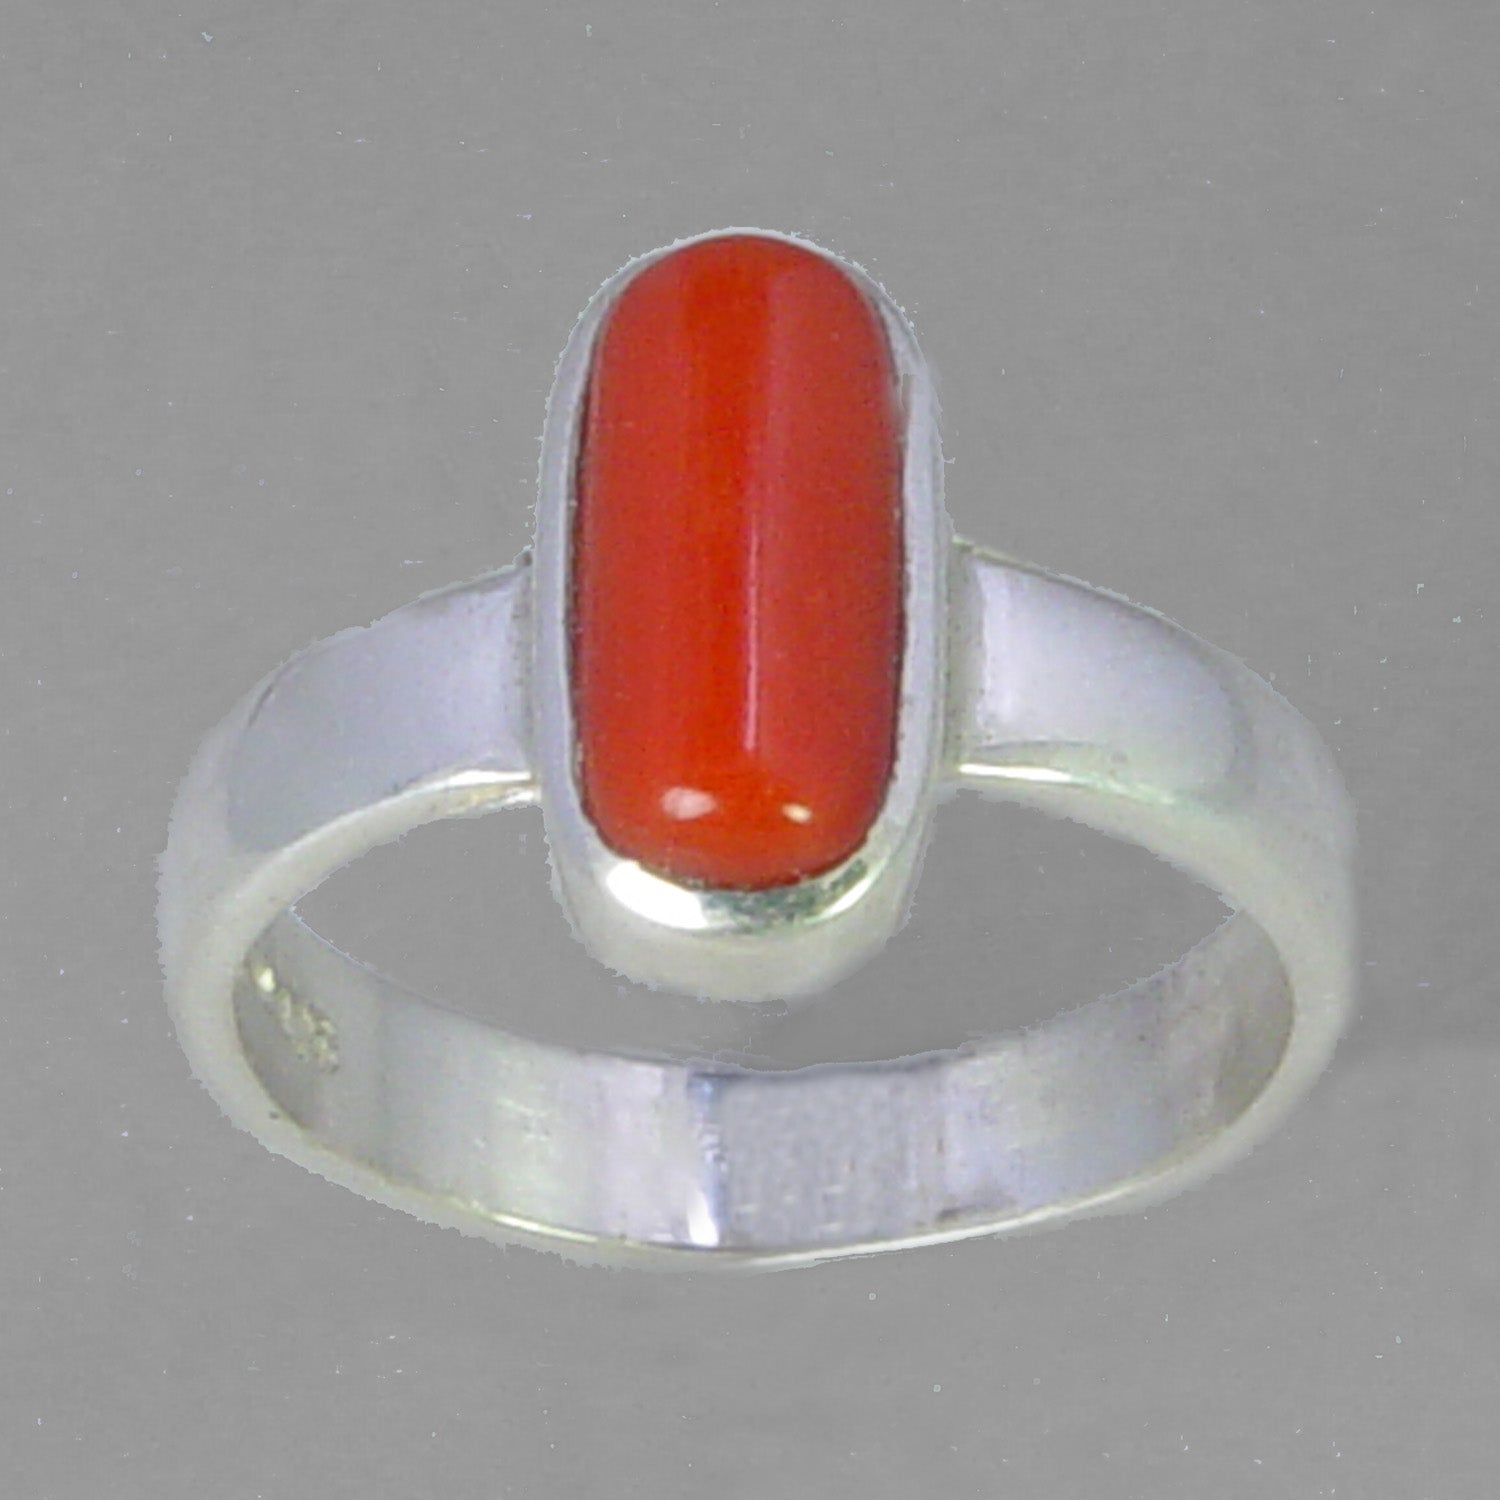 Red Coral 2.0 ct Cab Bezel Set Sterling Silver Ring, Size 7